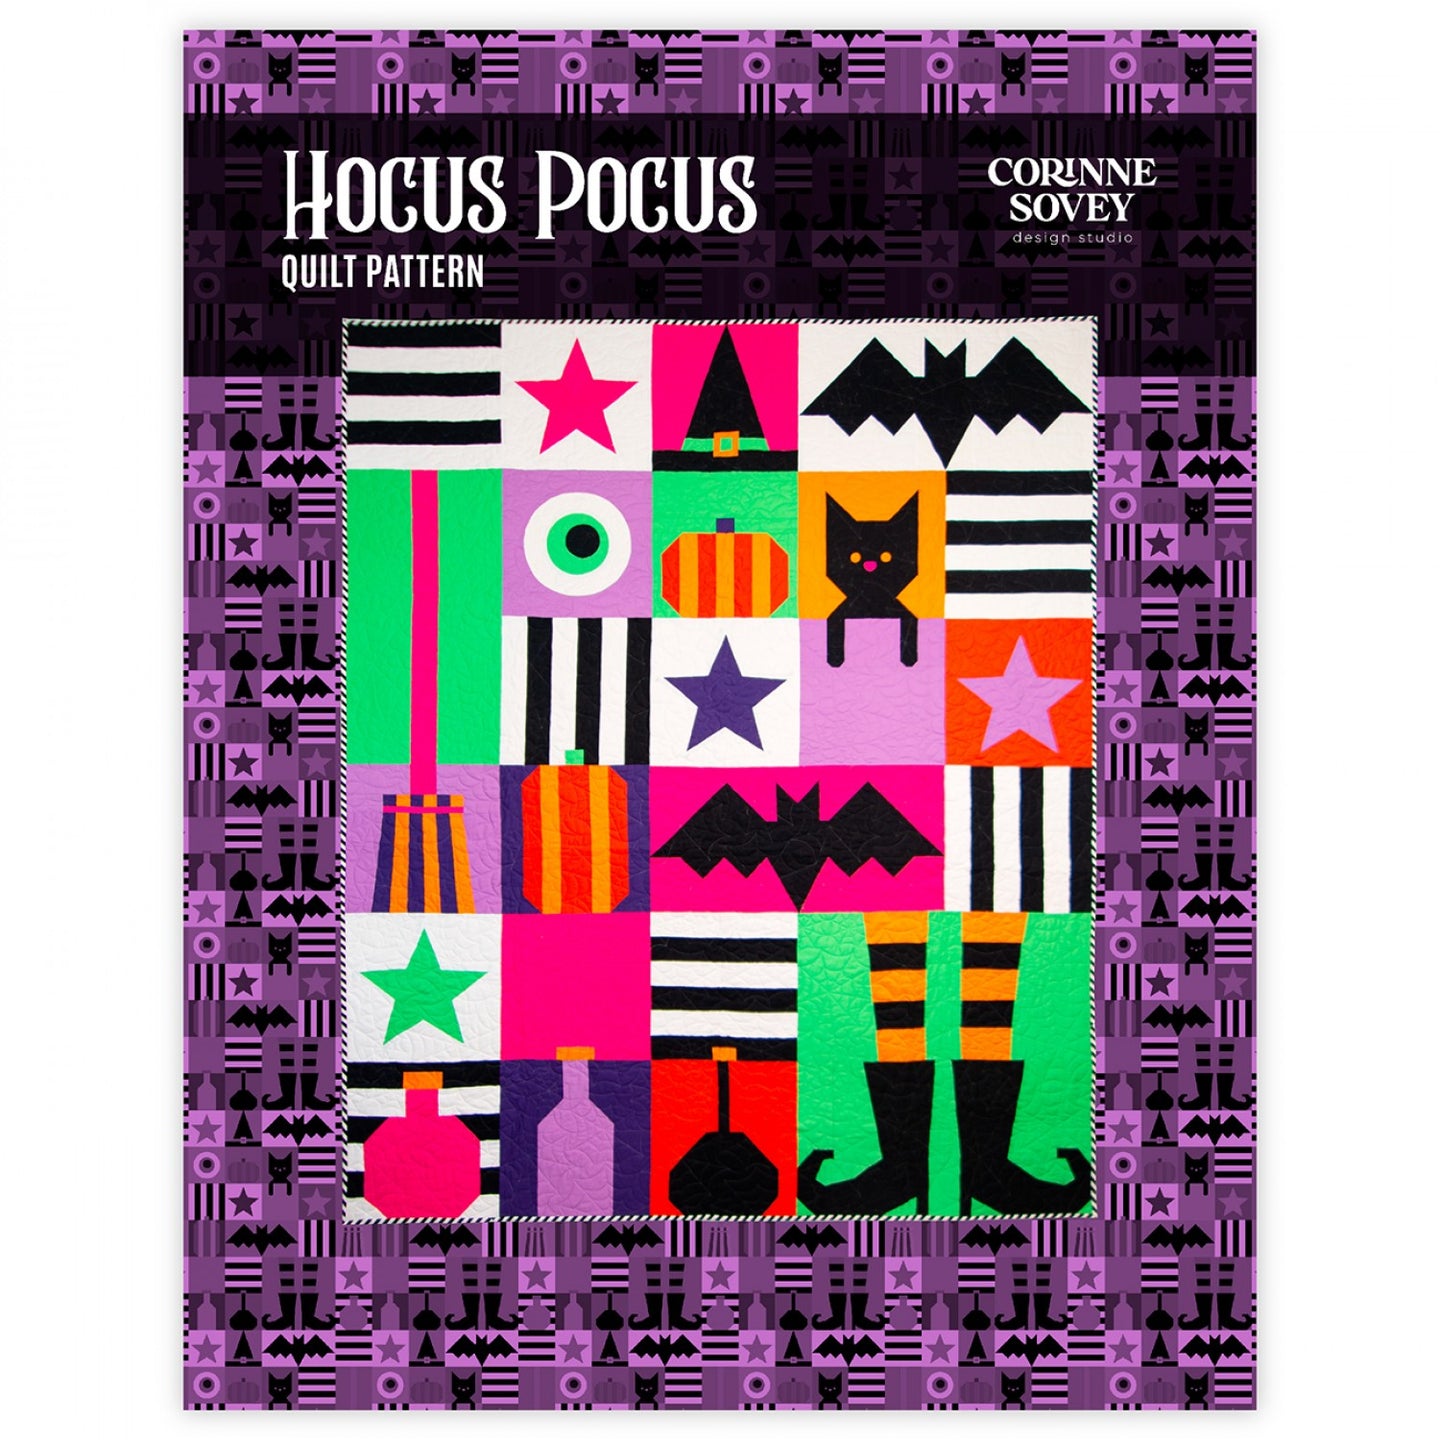 Corinne Sovey Hocus Pocus quilt pattern traditional piecing inset circles foundation paper piecing applique templates halloween witch broom bat boots potion tonic black cat